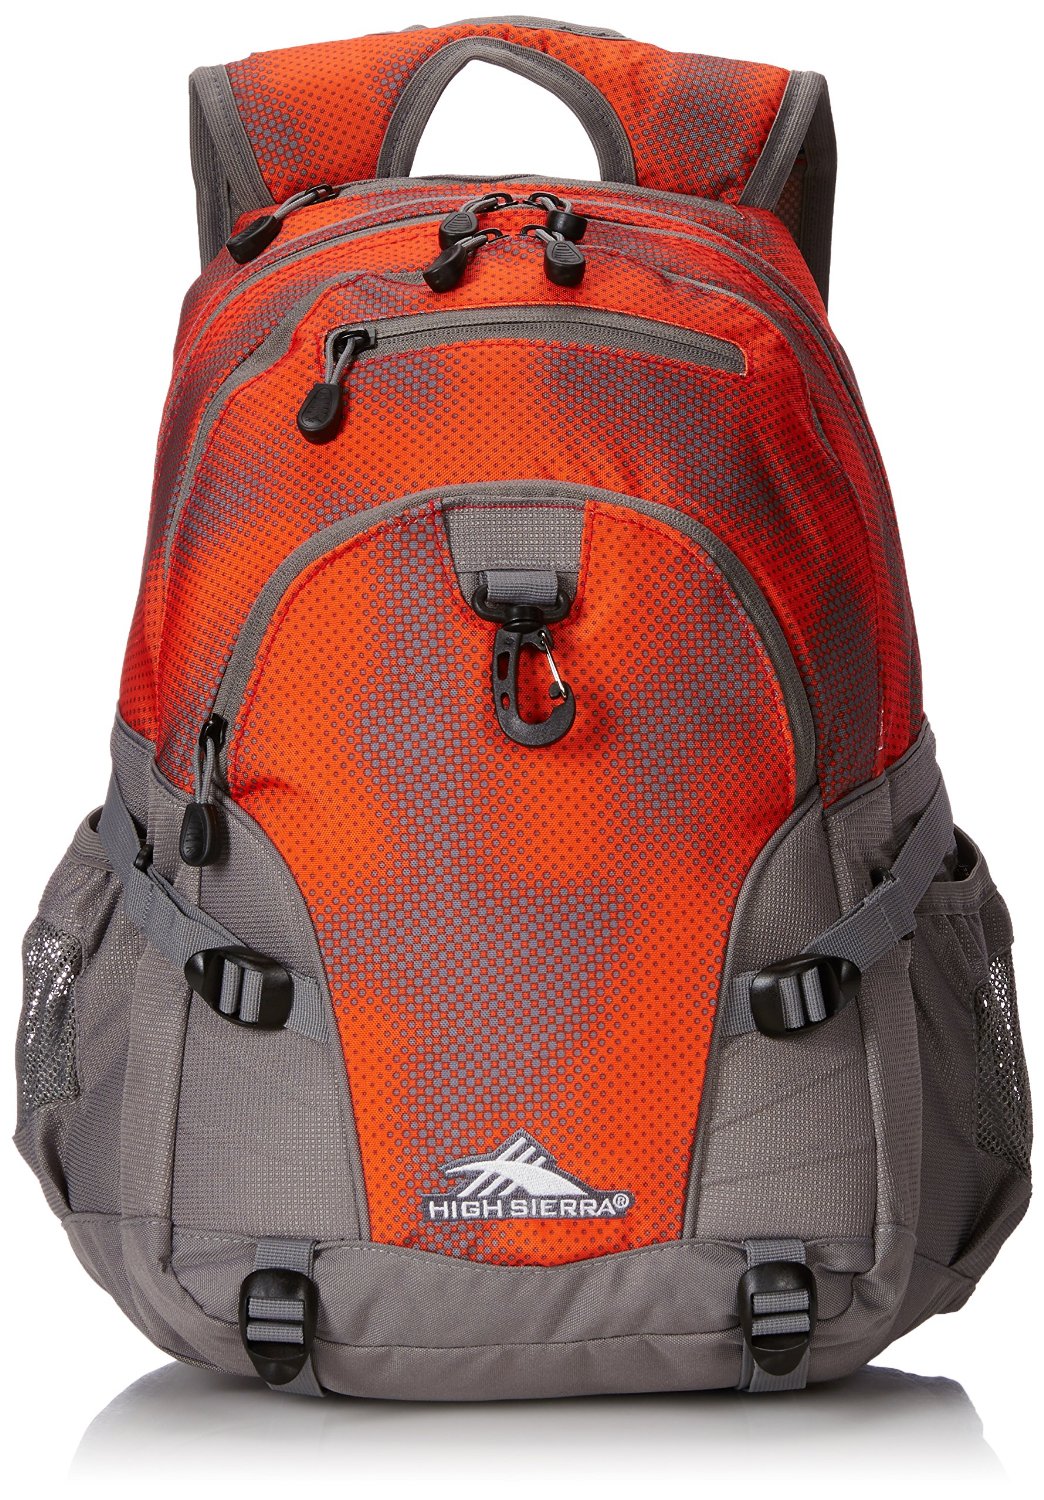 High Sierra Backpacks as low as $19.49 Today ONLY! - Become a Coupon Queen